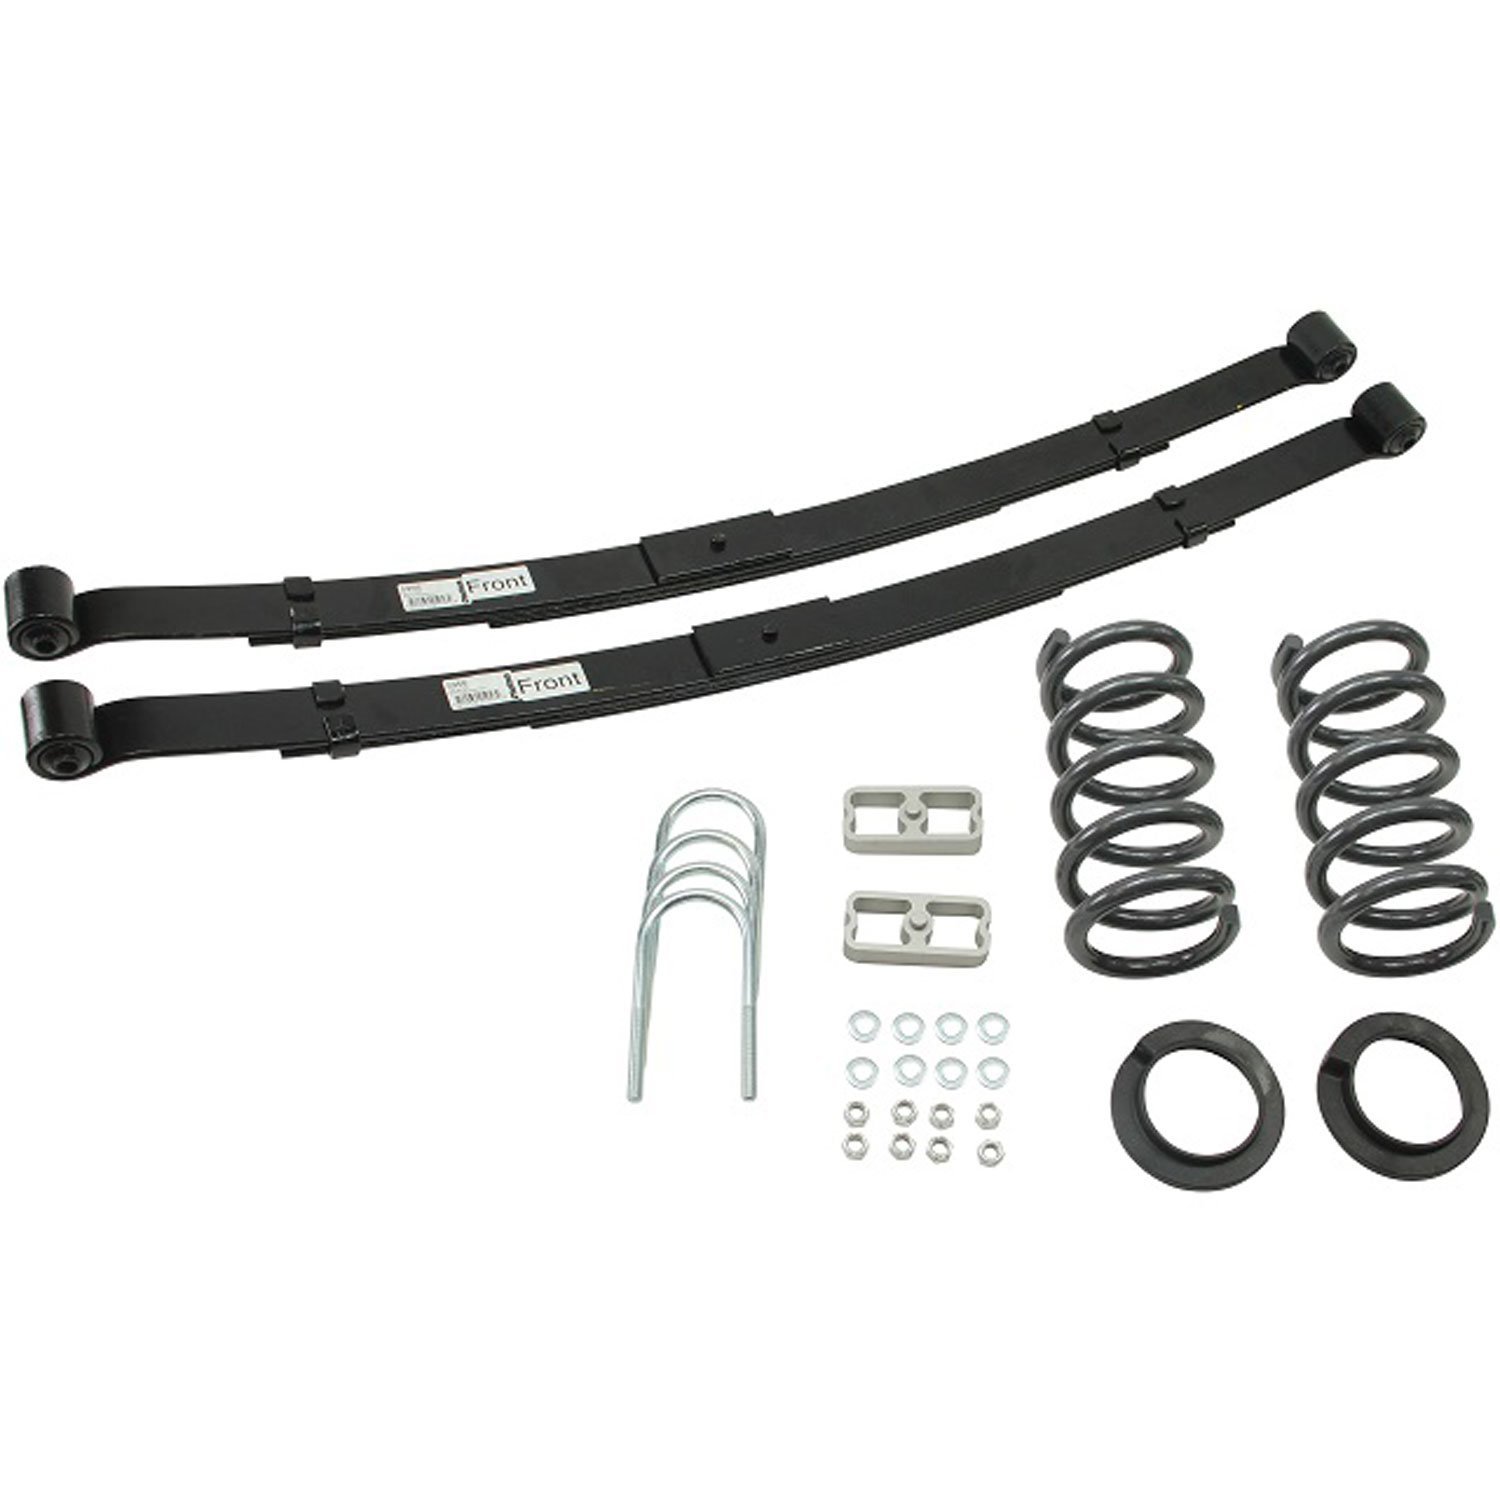 Complete Lowering Kit for 1995-1997 Chevy Blazer/GMC Jimmy 6cyl